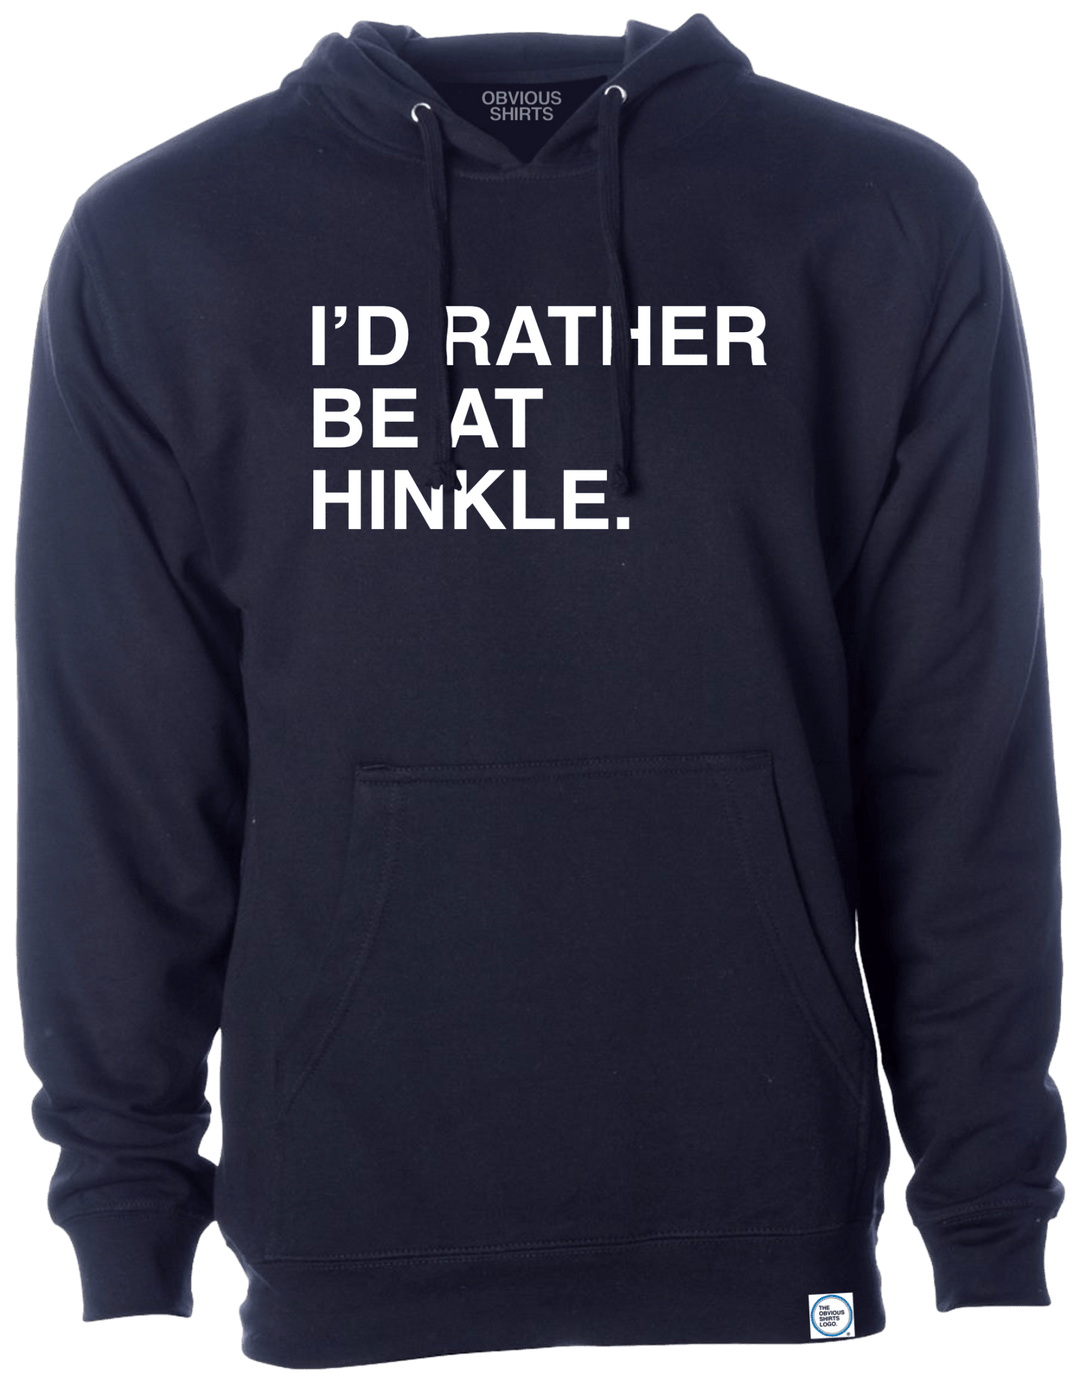 I'D RATHER BE AT HINKLE. (HOODED SWEATSHIRT) - OBVIOUS SHIRTS